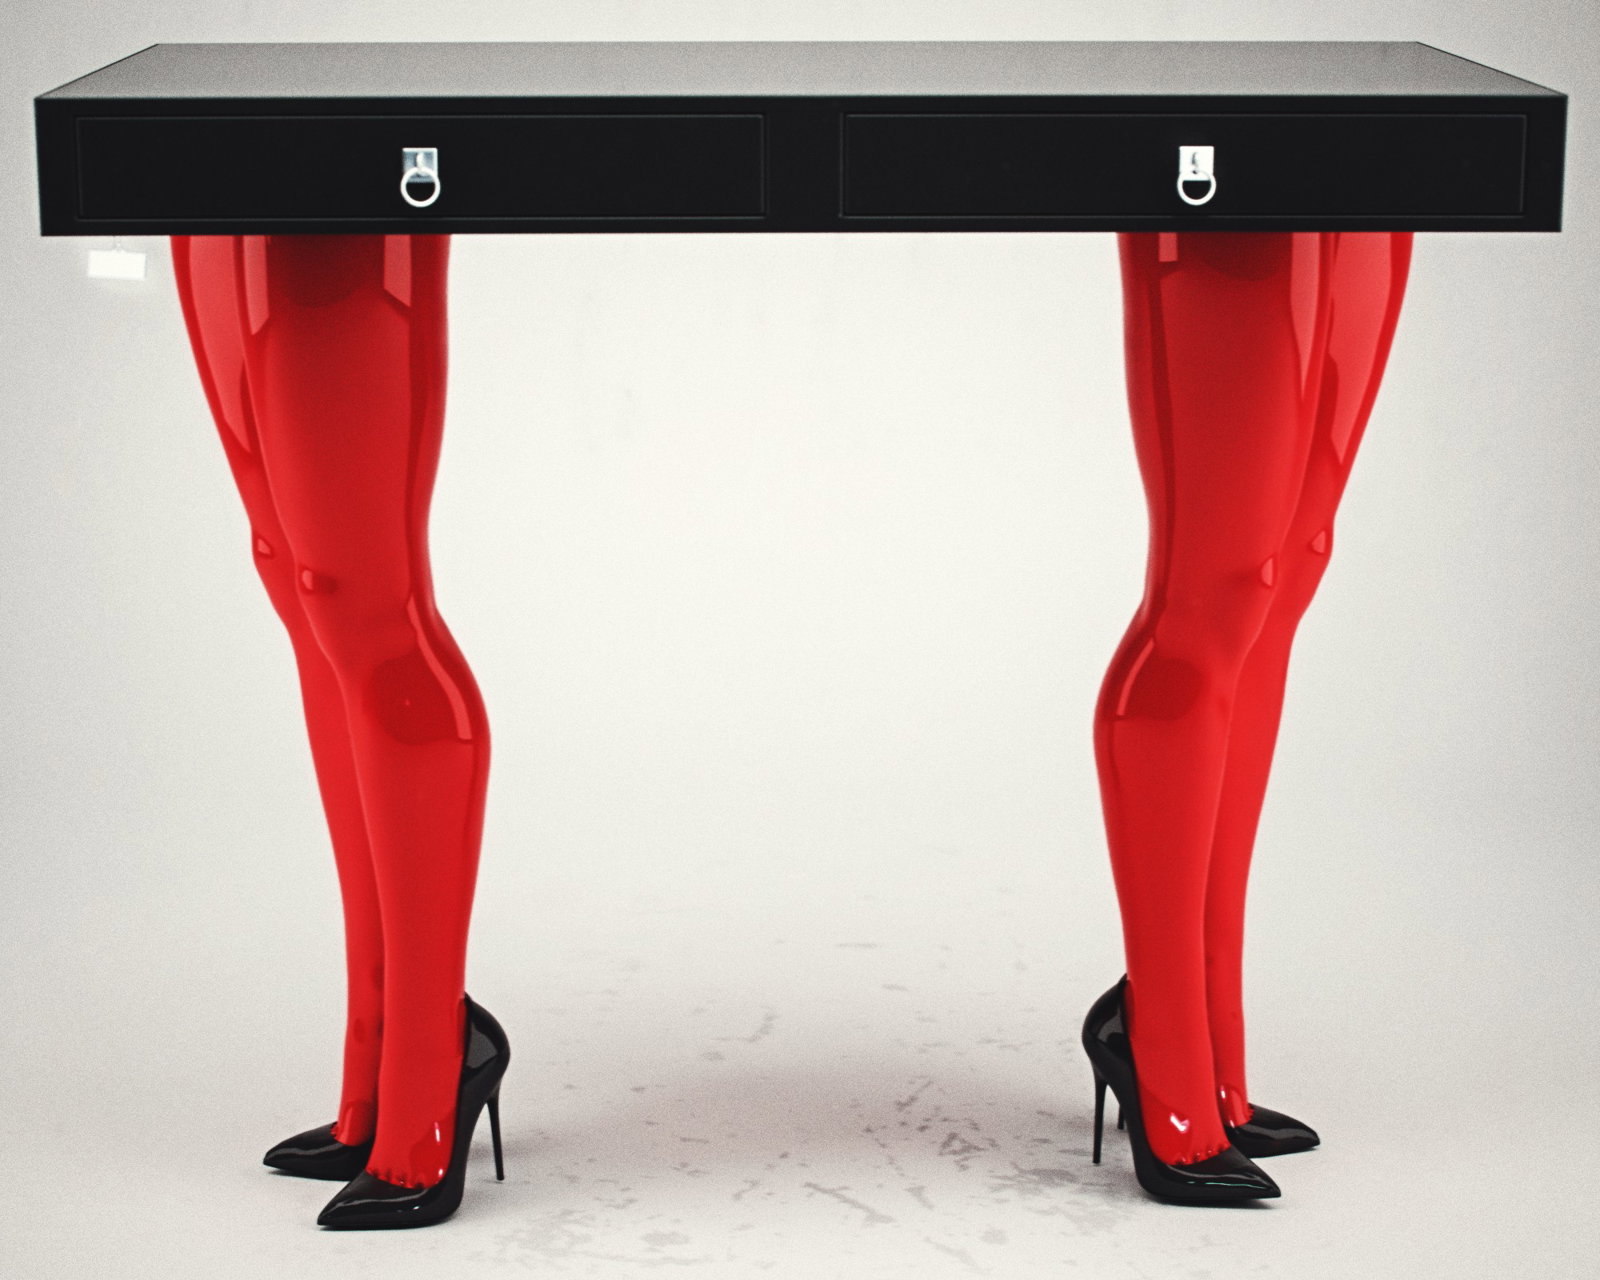 Watch the Photo by Kvint Kallas with the username @kvintkallas, posted on January 25, 2020. The post is about the topic Kvint Kallas Fetish Art. and the text says '#fetish #footfetish #legs #table #fetishart #furniture #highheels #kvintkallas #femdom'